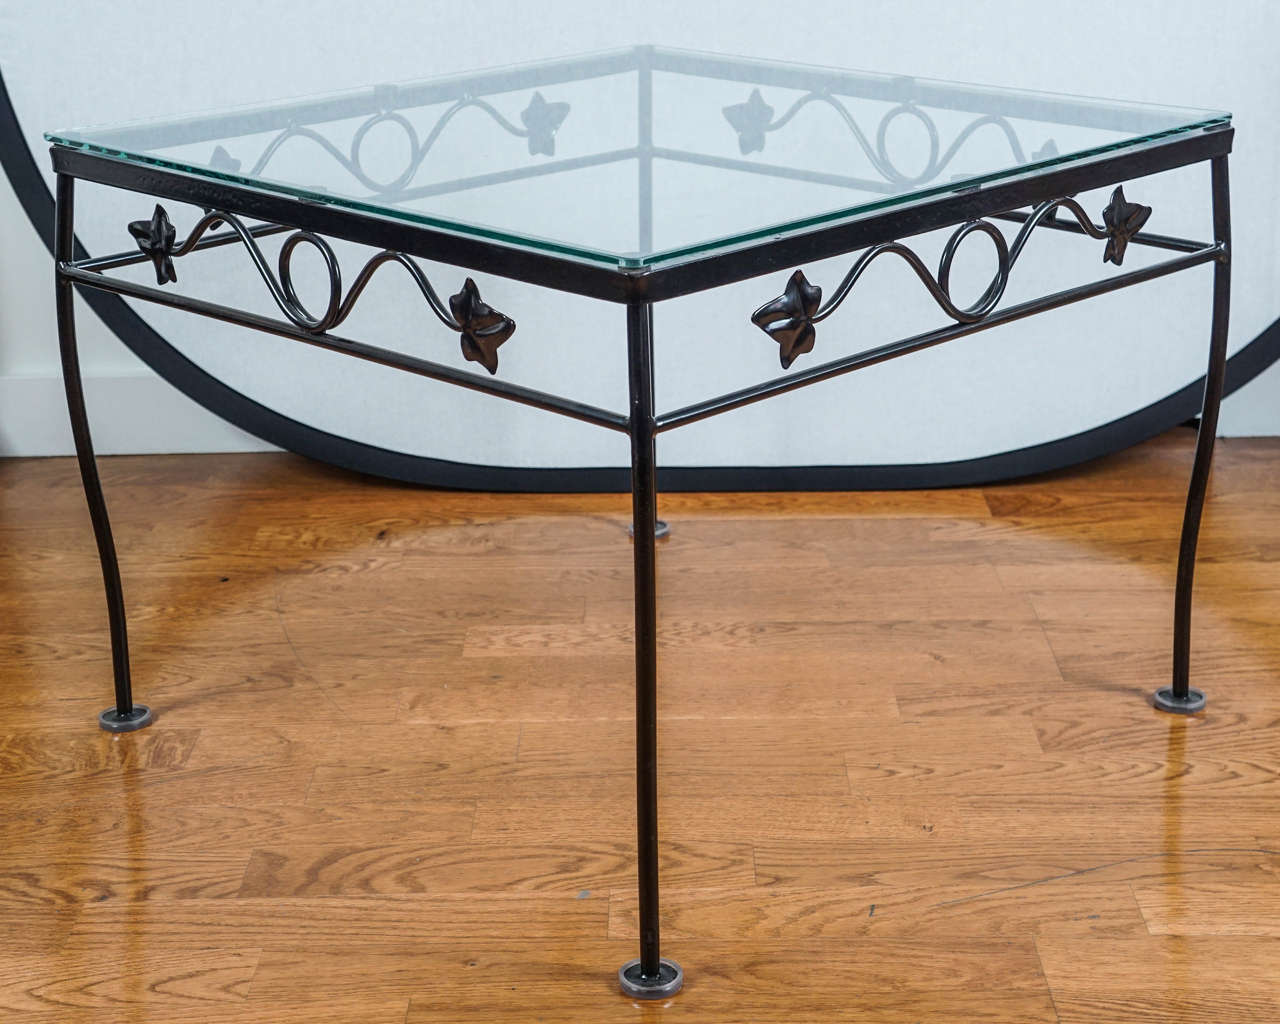 mid century, newly painted, wrought iron, glass top side table, in a charming, scrolled leaf pattern.
pairs nicely with matching side chai and three piece sofa listed on site.